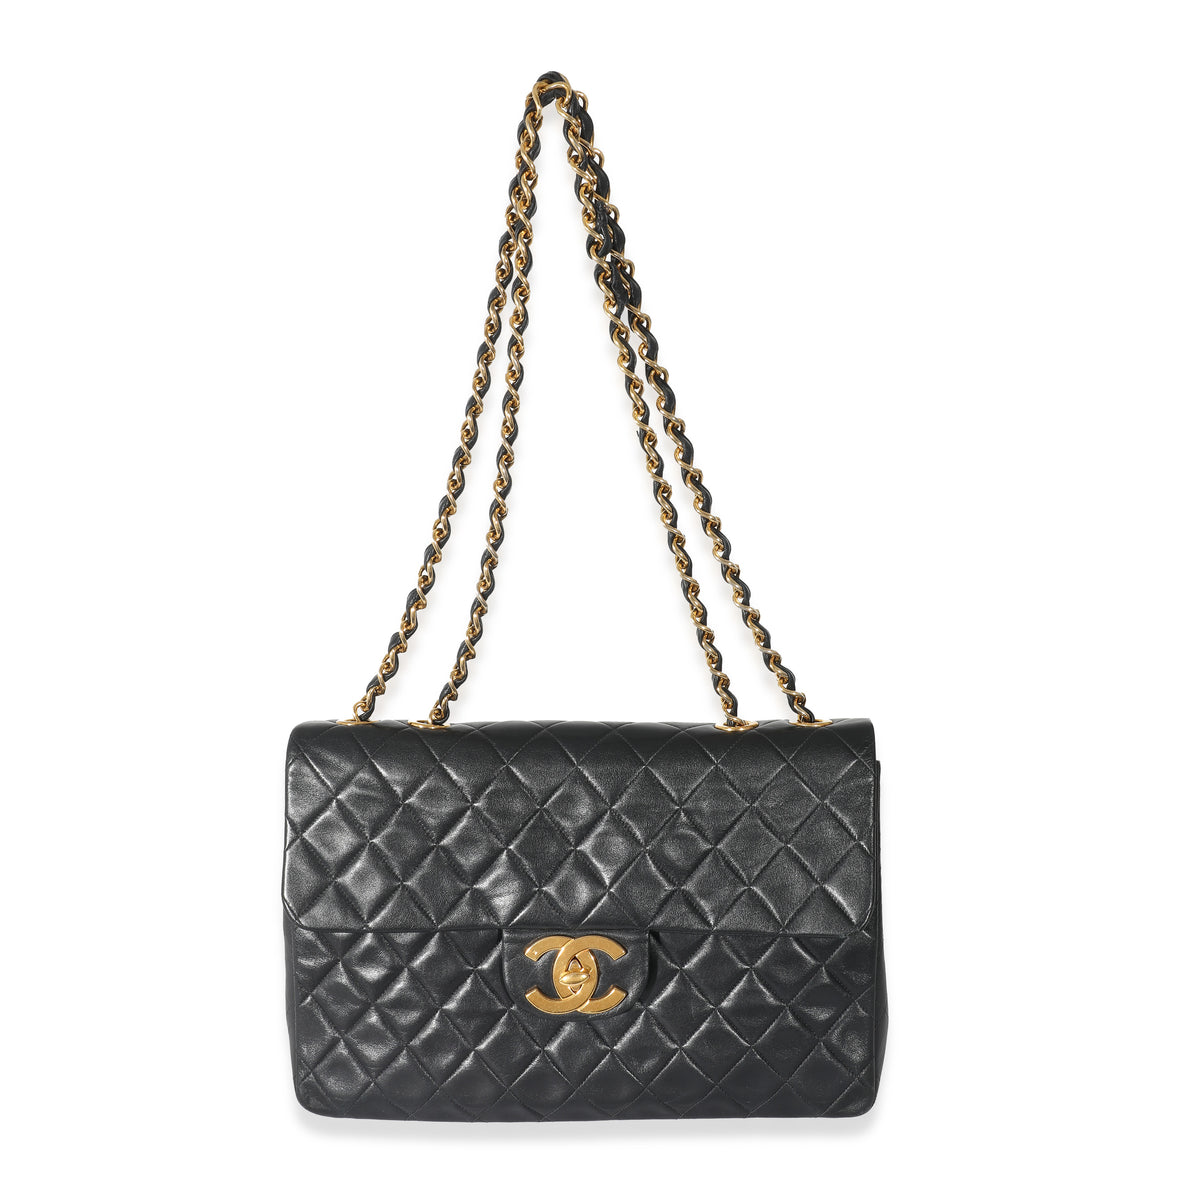 Chanel Black Quilted Lambskin Jumbo XL Vintage Classic Flap Bag Chanel